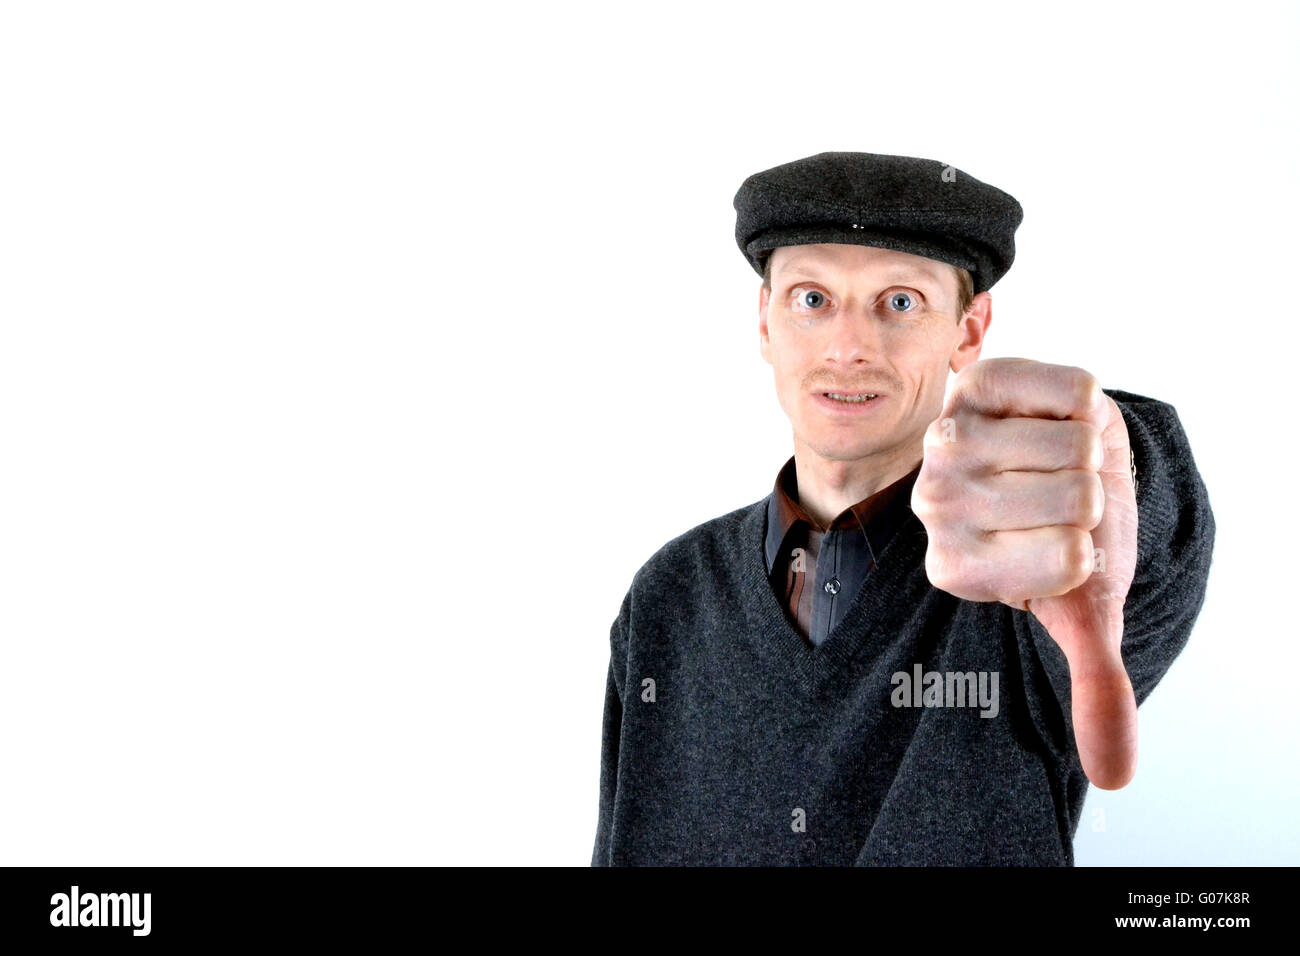 Man with hat of the thumb decreases Stock Photo